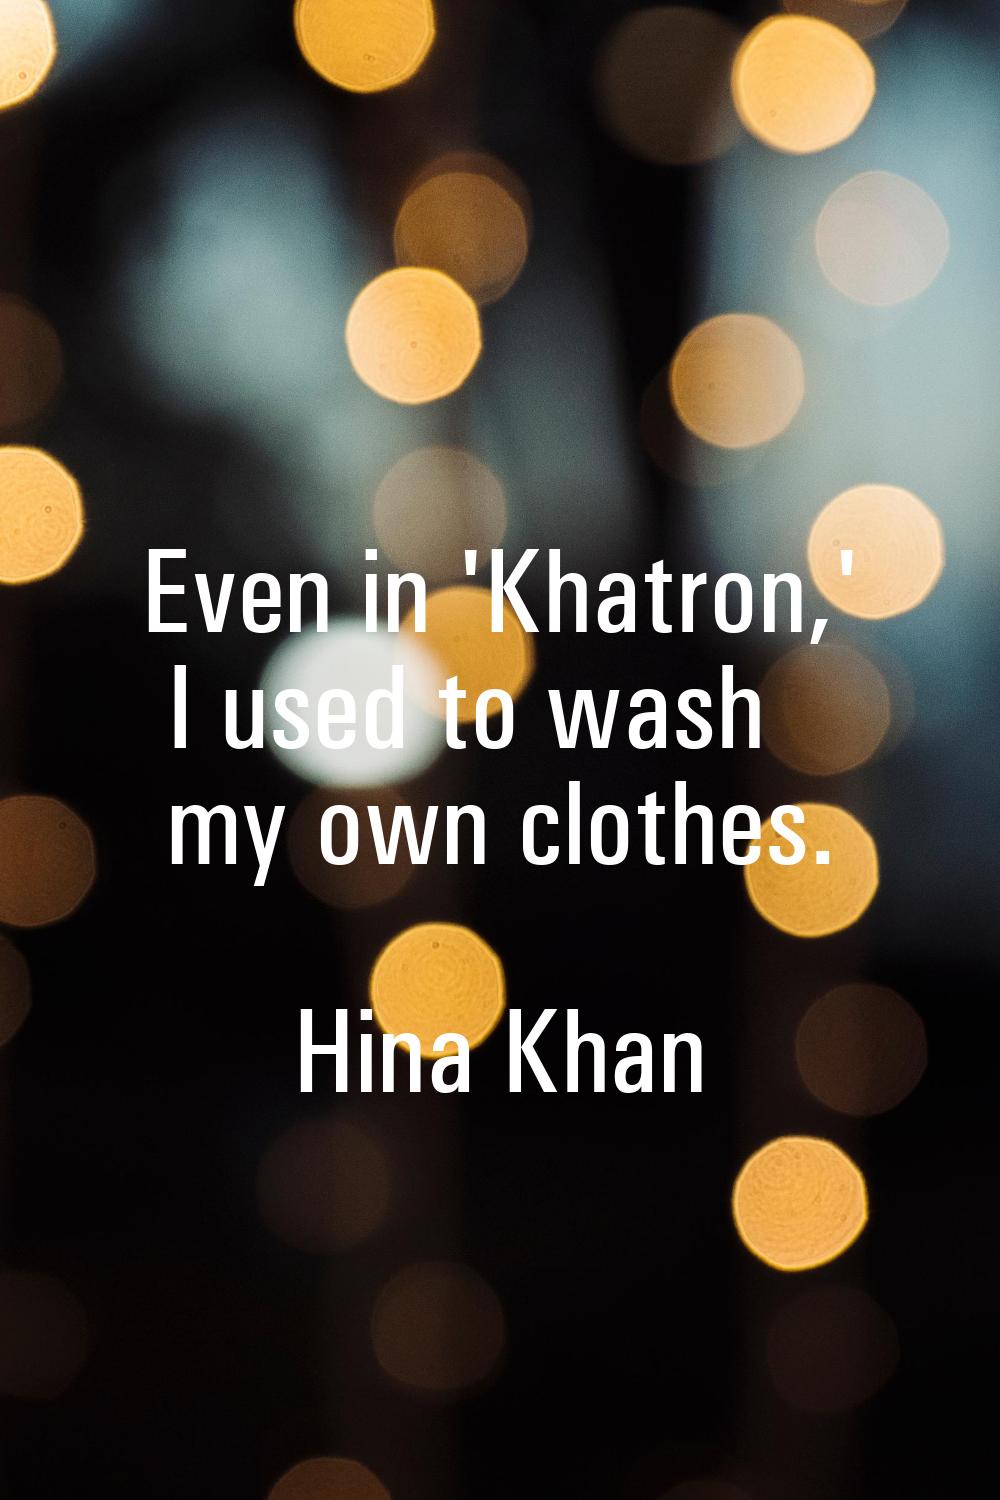 Even in 'Khatron,' I used to wash my own clothes.